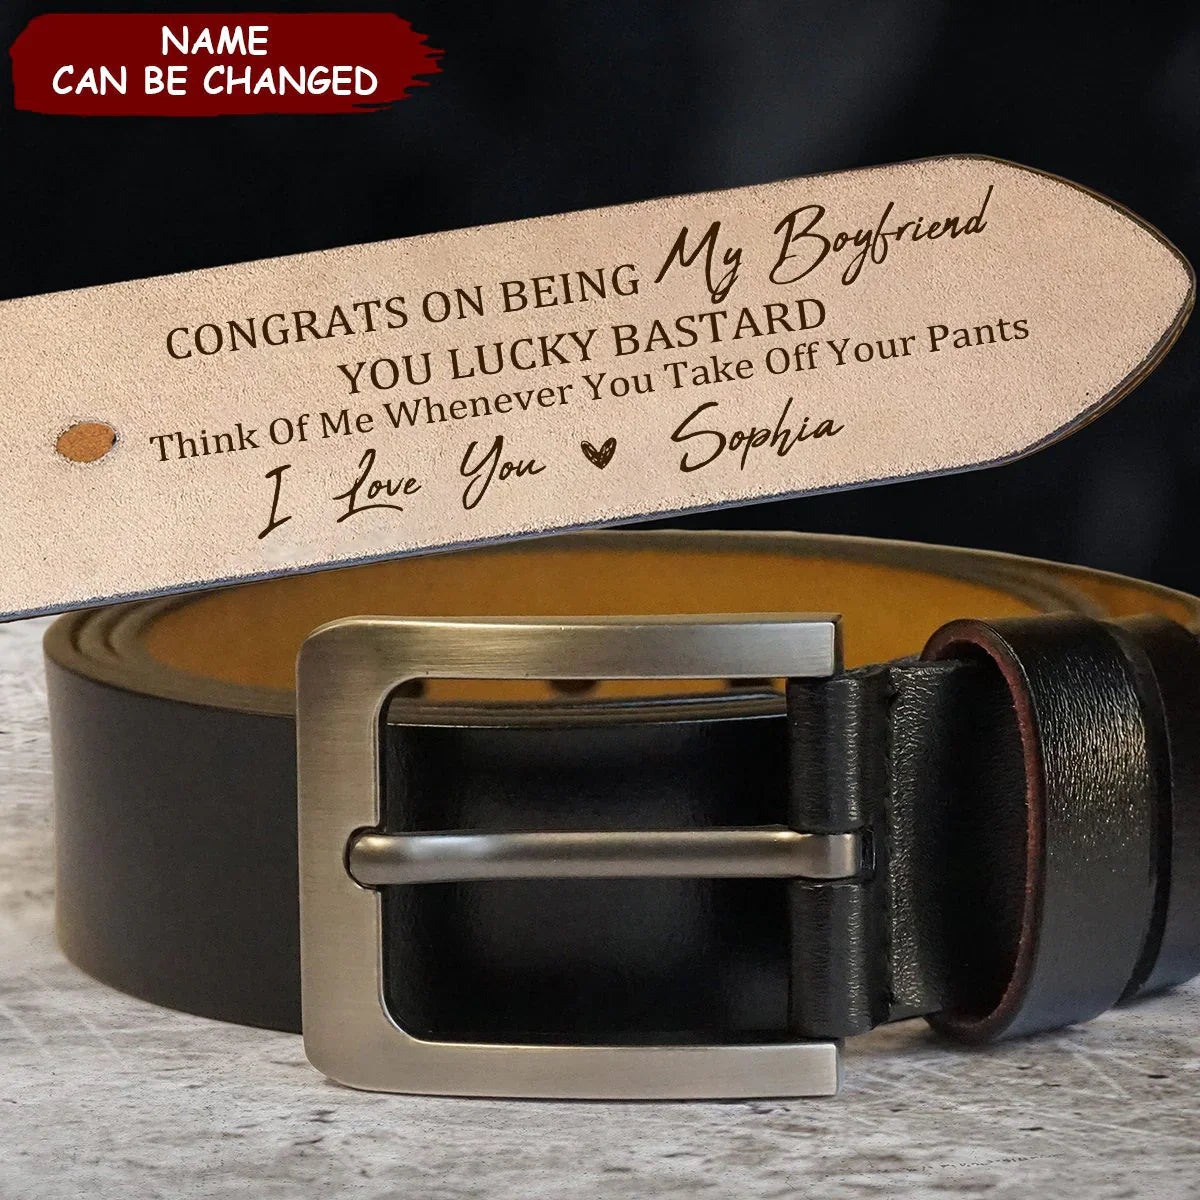 Congrats On Being My Husband  - Personalized Engraved Leather Belt